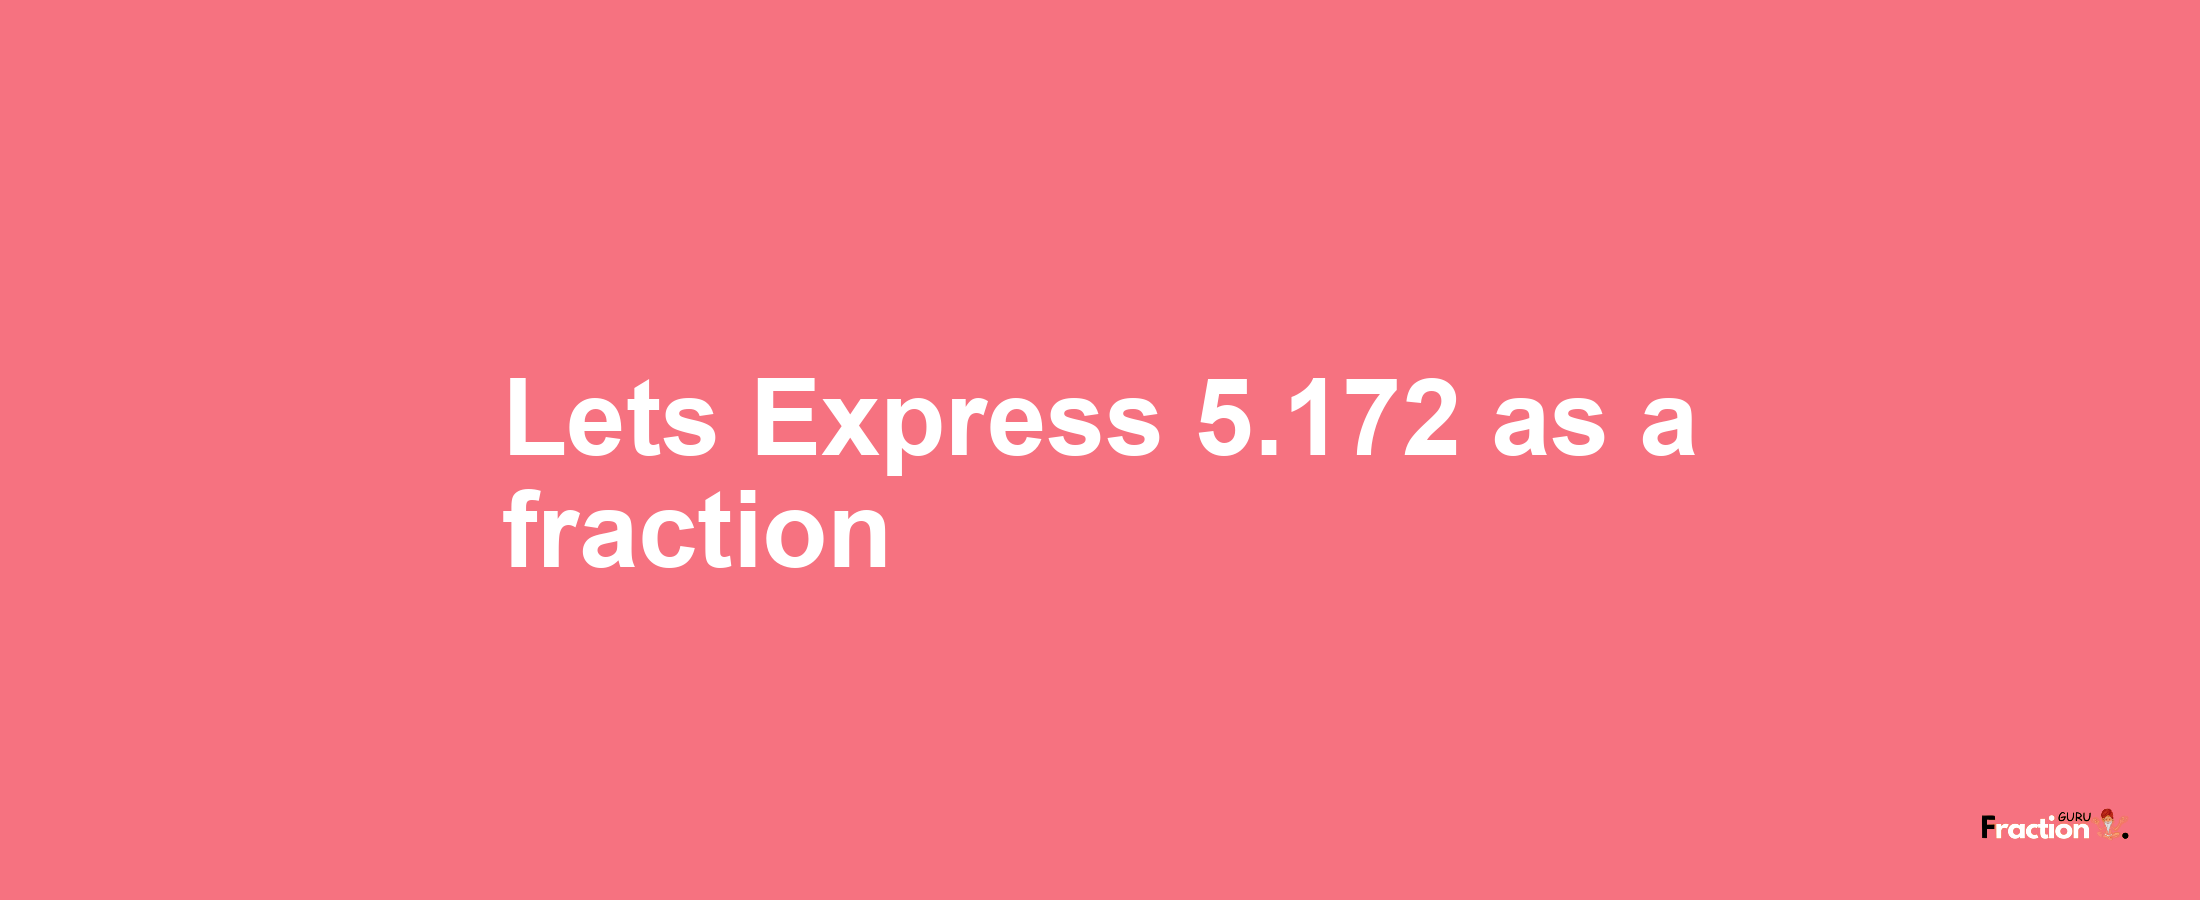 Lets Express 5.172 as afraction